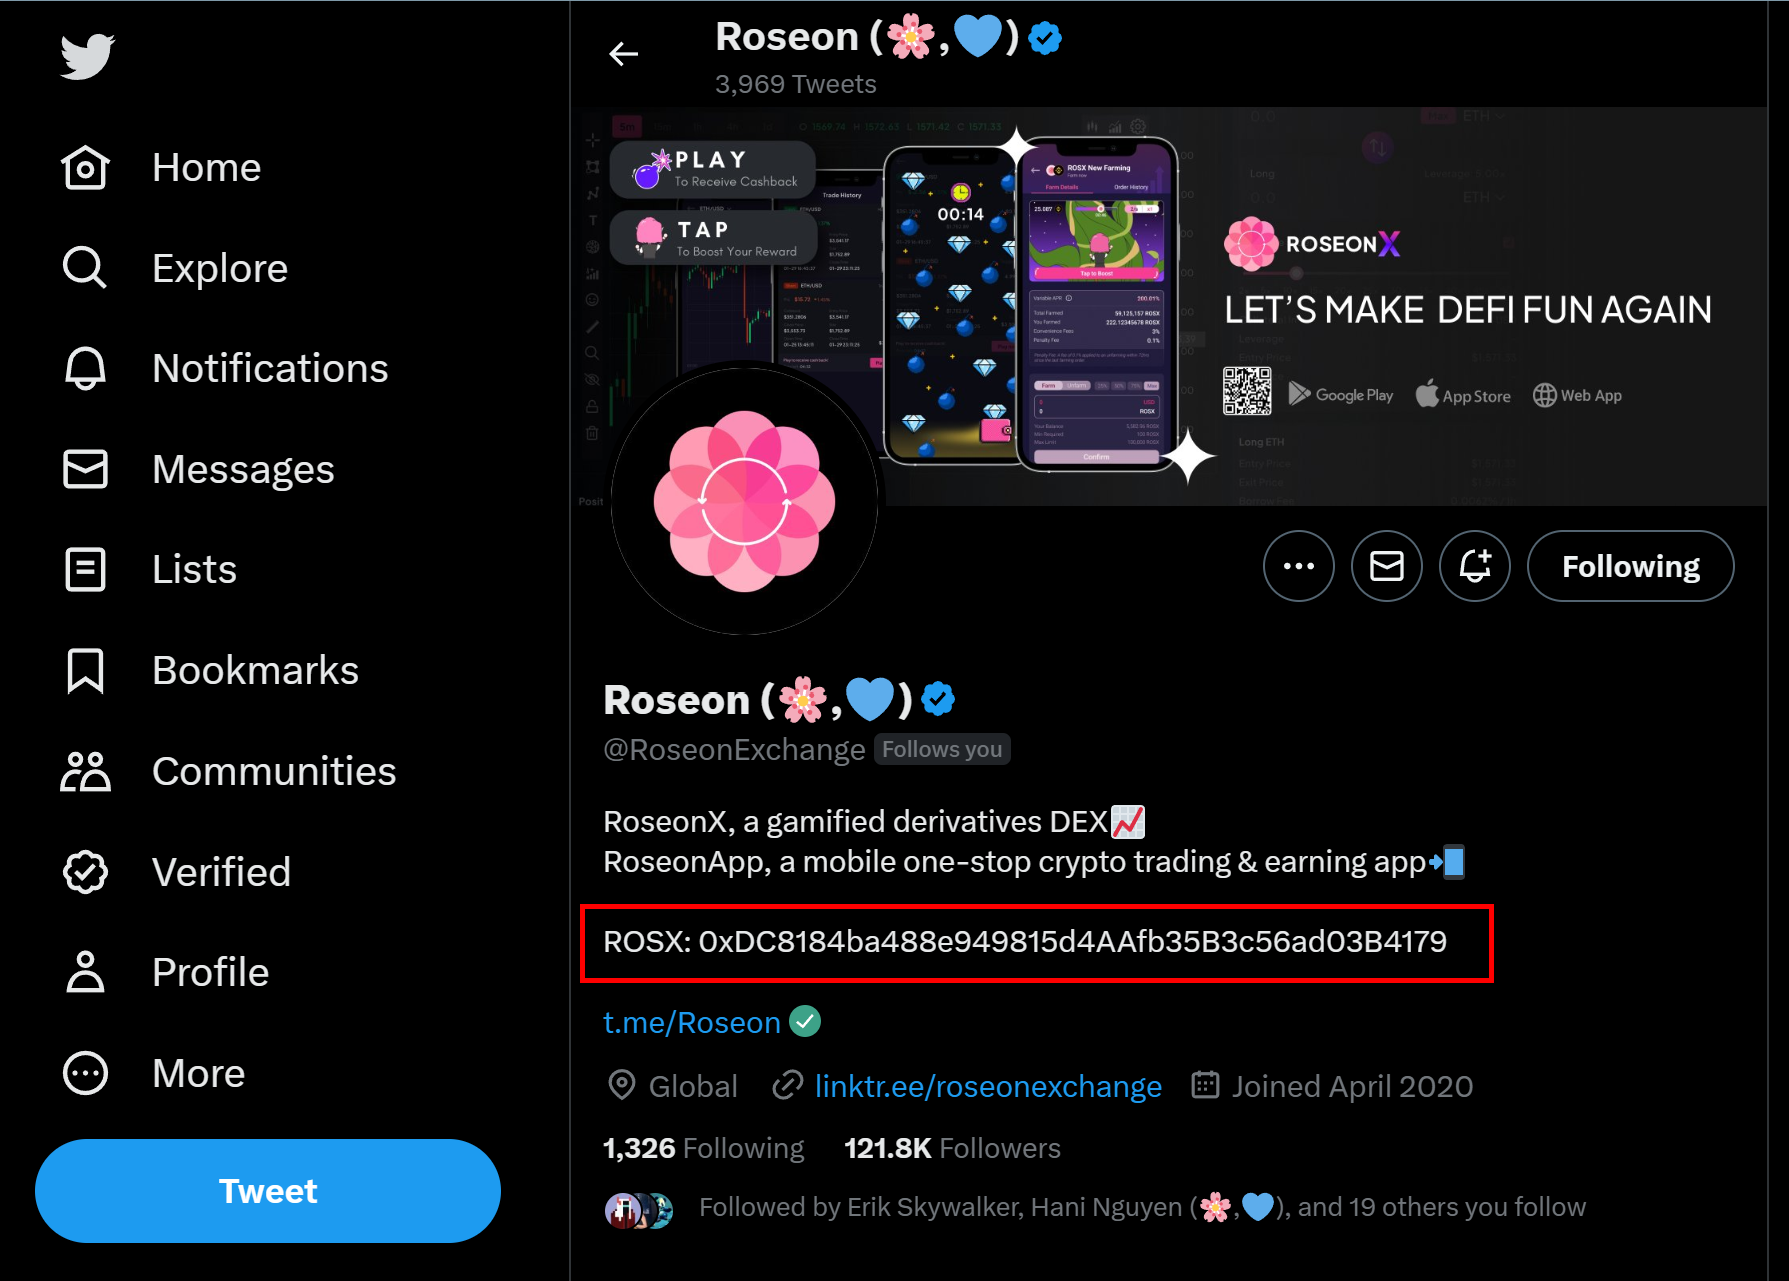 Roseon’s official account on Twitter